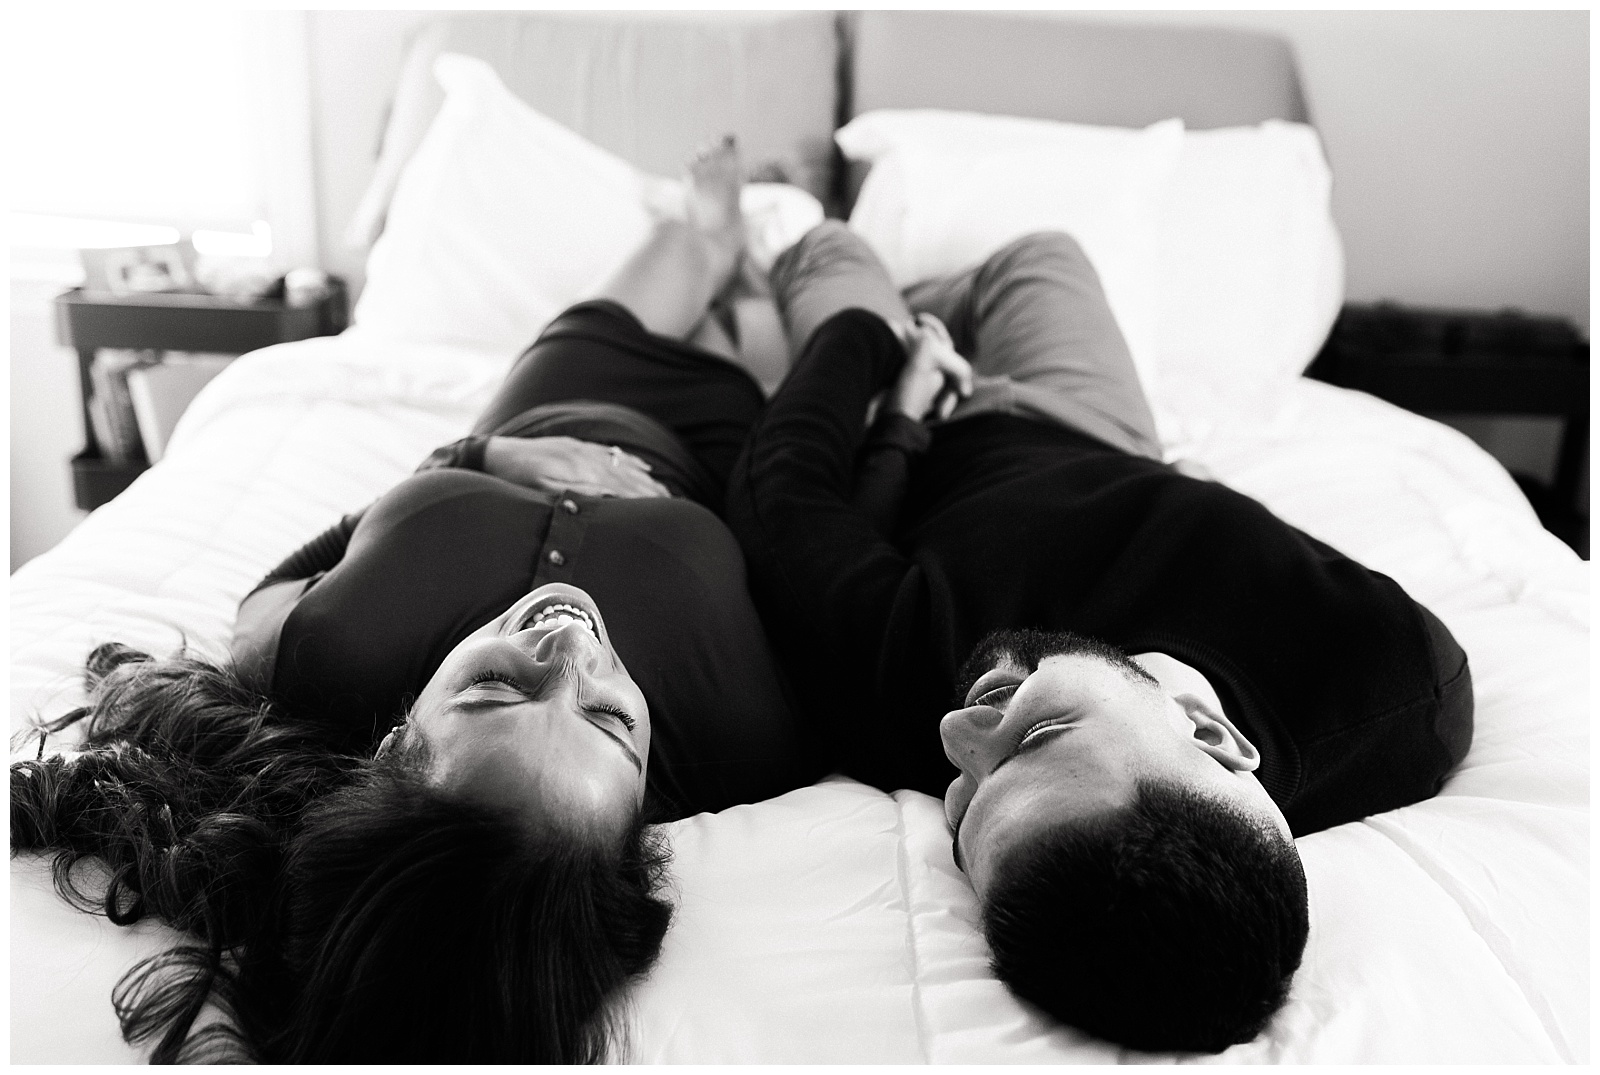 In Home Maternity Session, Nursery, Baby, New Parents, Maternity Shoot, Pregnant, Pregnancy Photos, New Jersey, Photographer, Baby Boy, Bed, Lay down, black and white, Photo